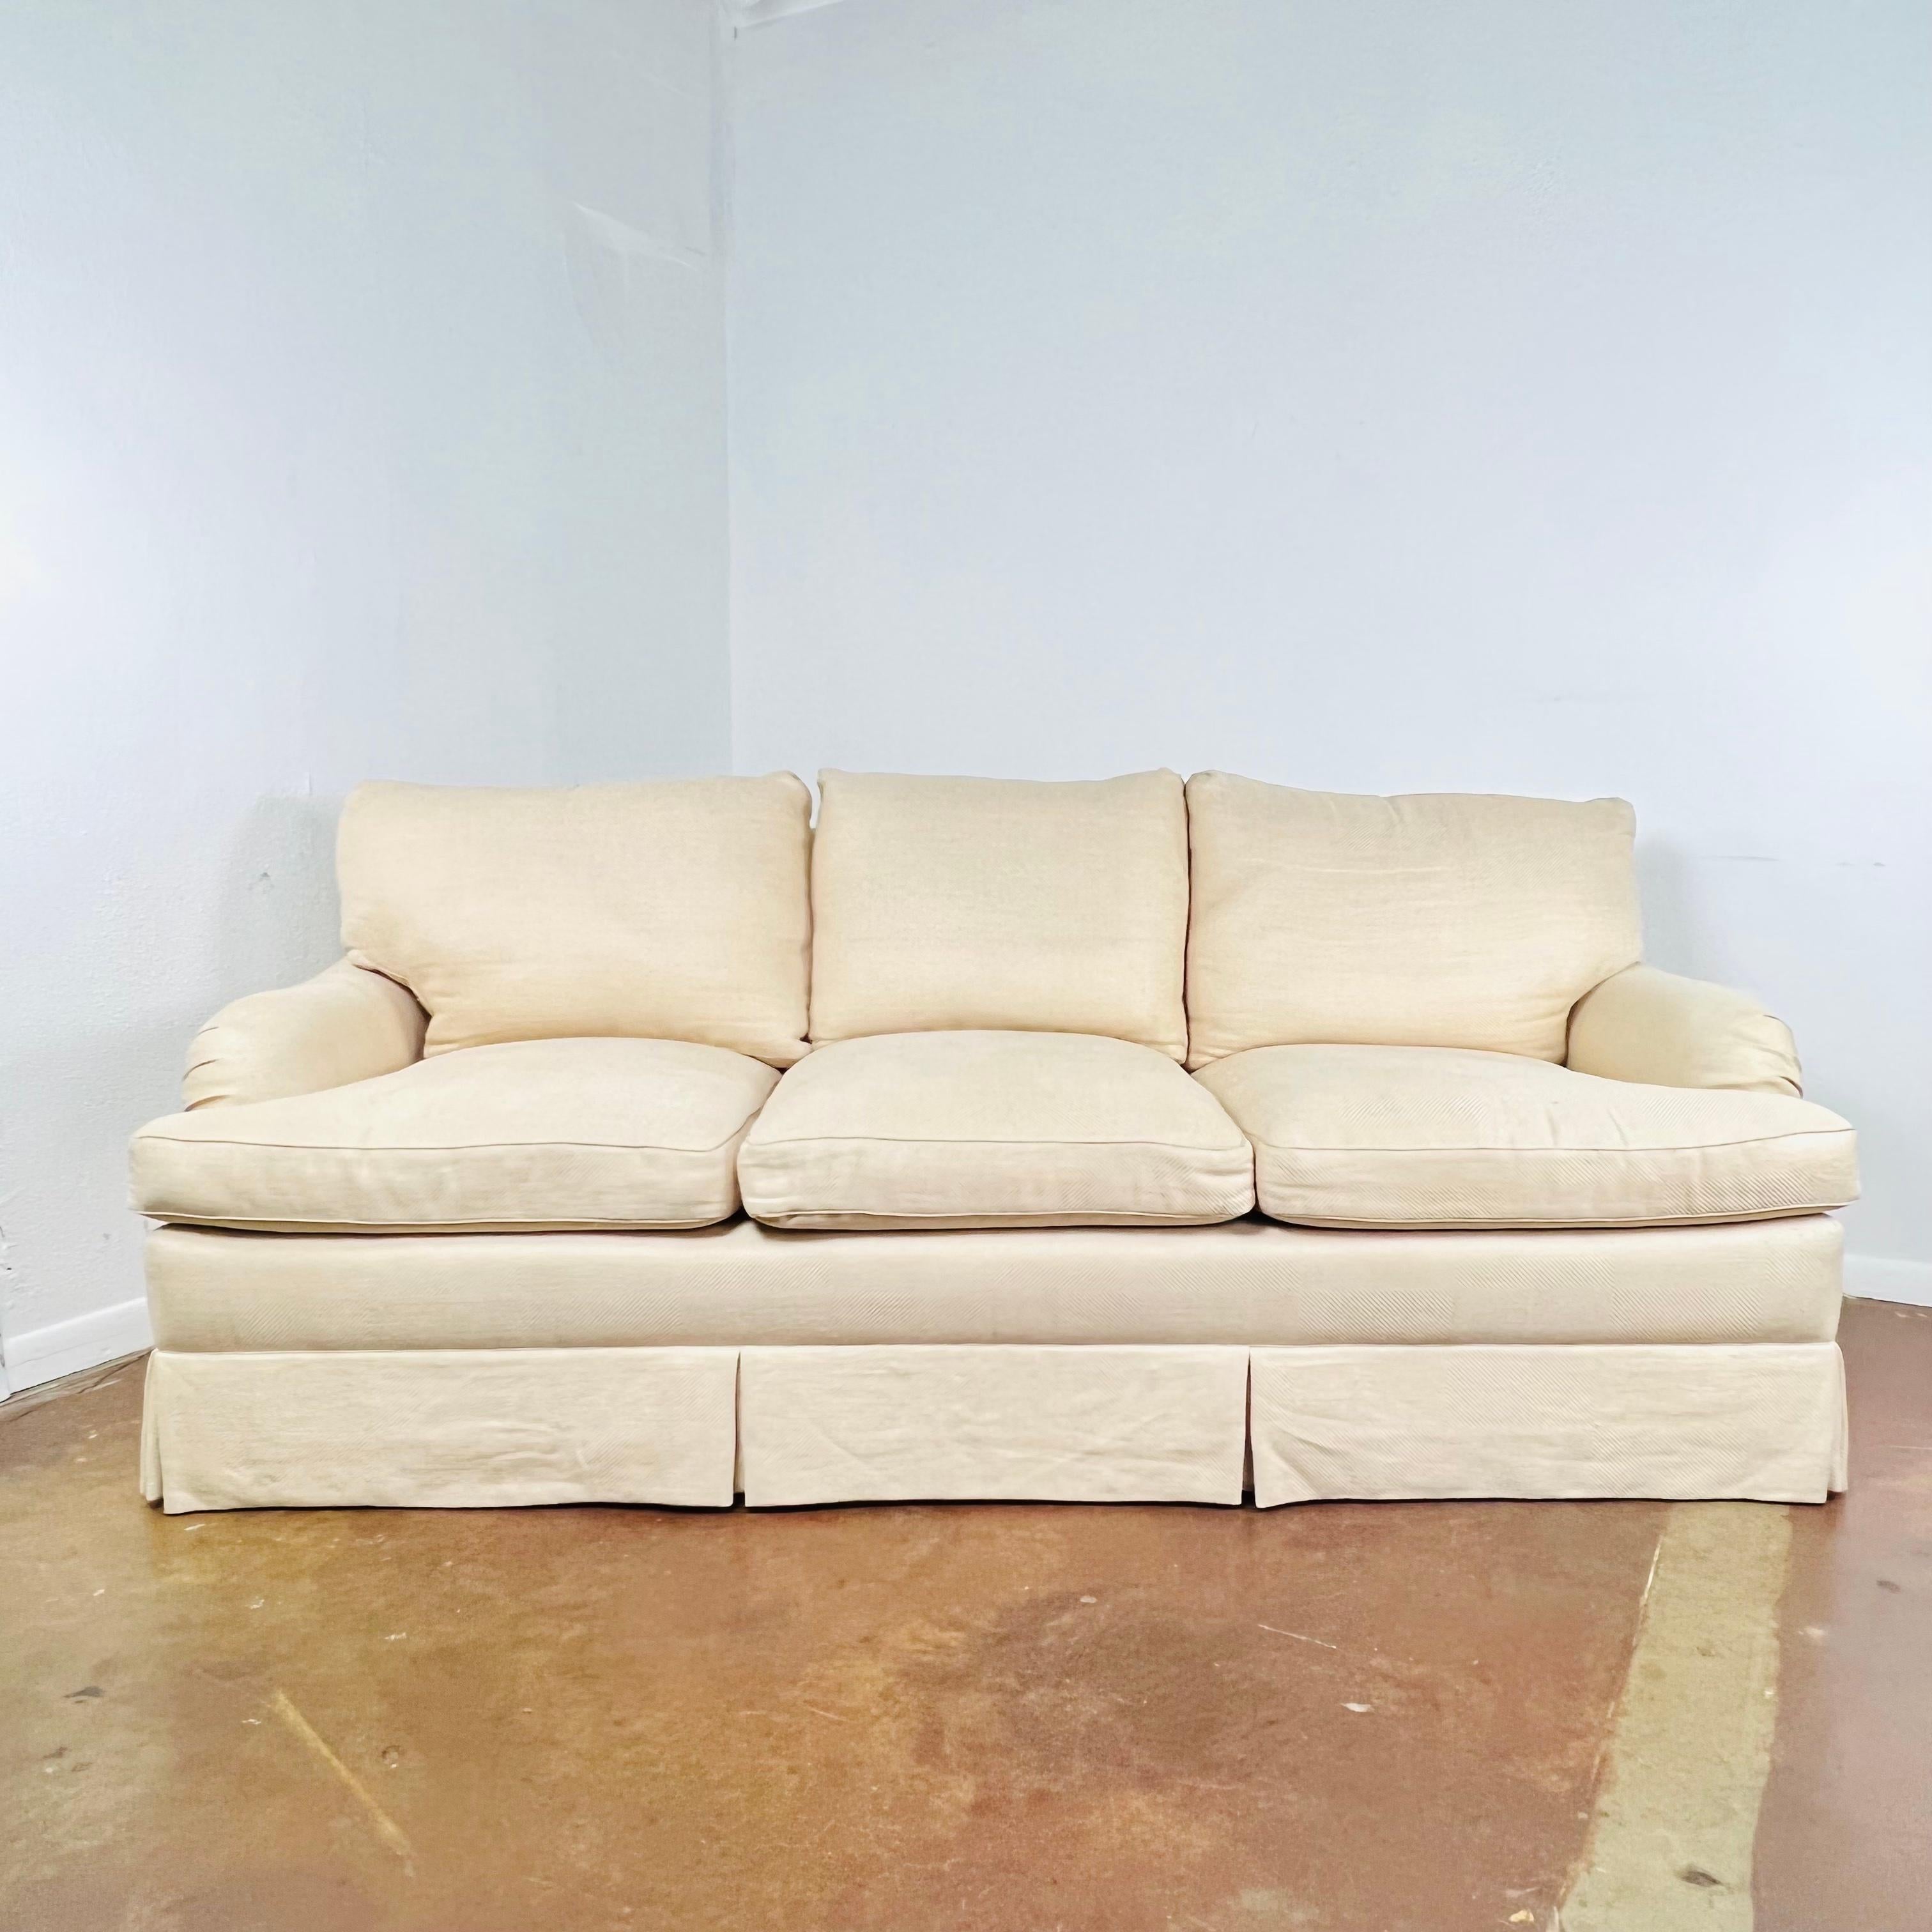 This elegant English-arm sofa features feather down wrapped T cushions, down filled loose back cushions, and tapered legs under a waterfall skirt. Reupholstery is needed due to staining and wear from age and use. Good structural condition. Ask us